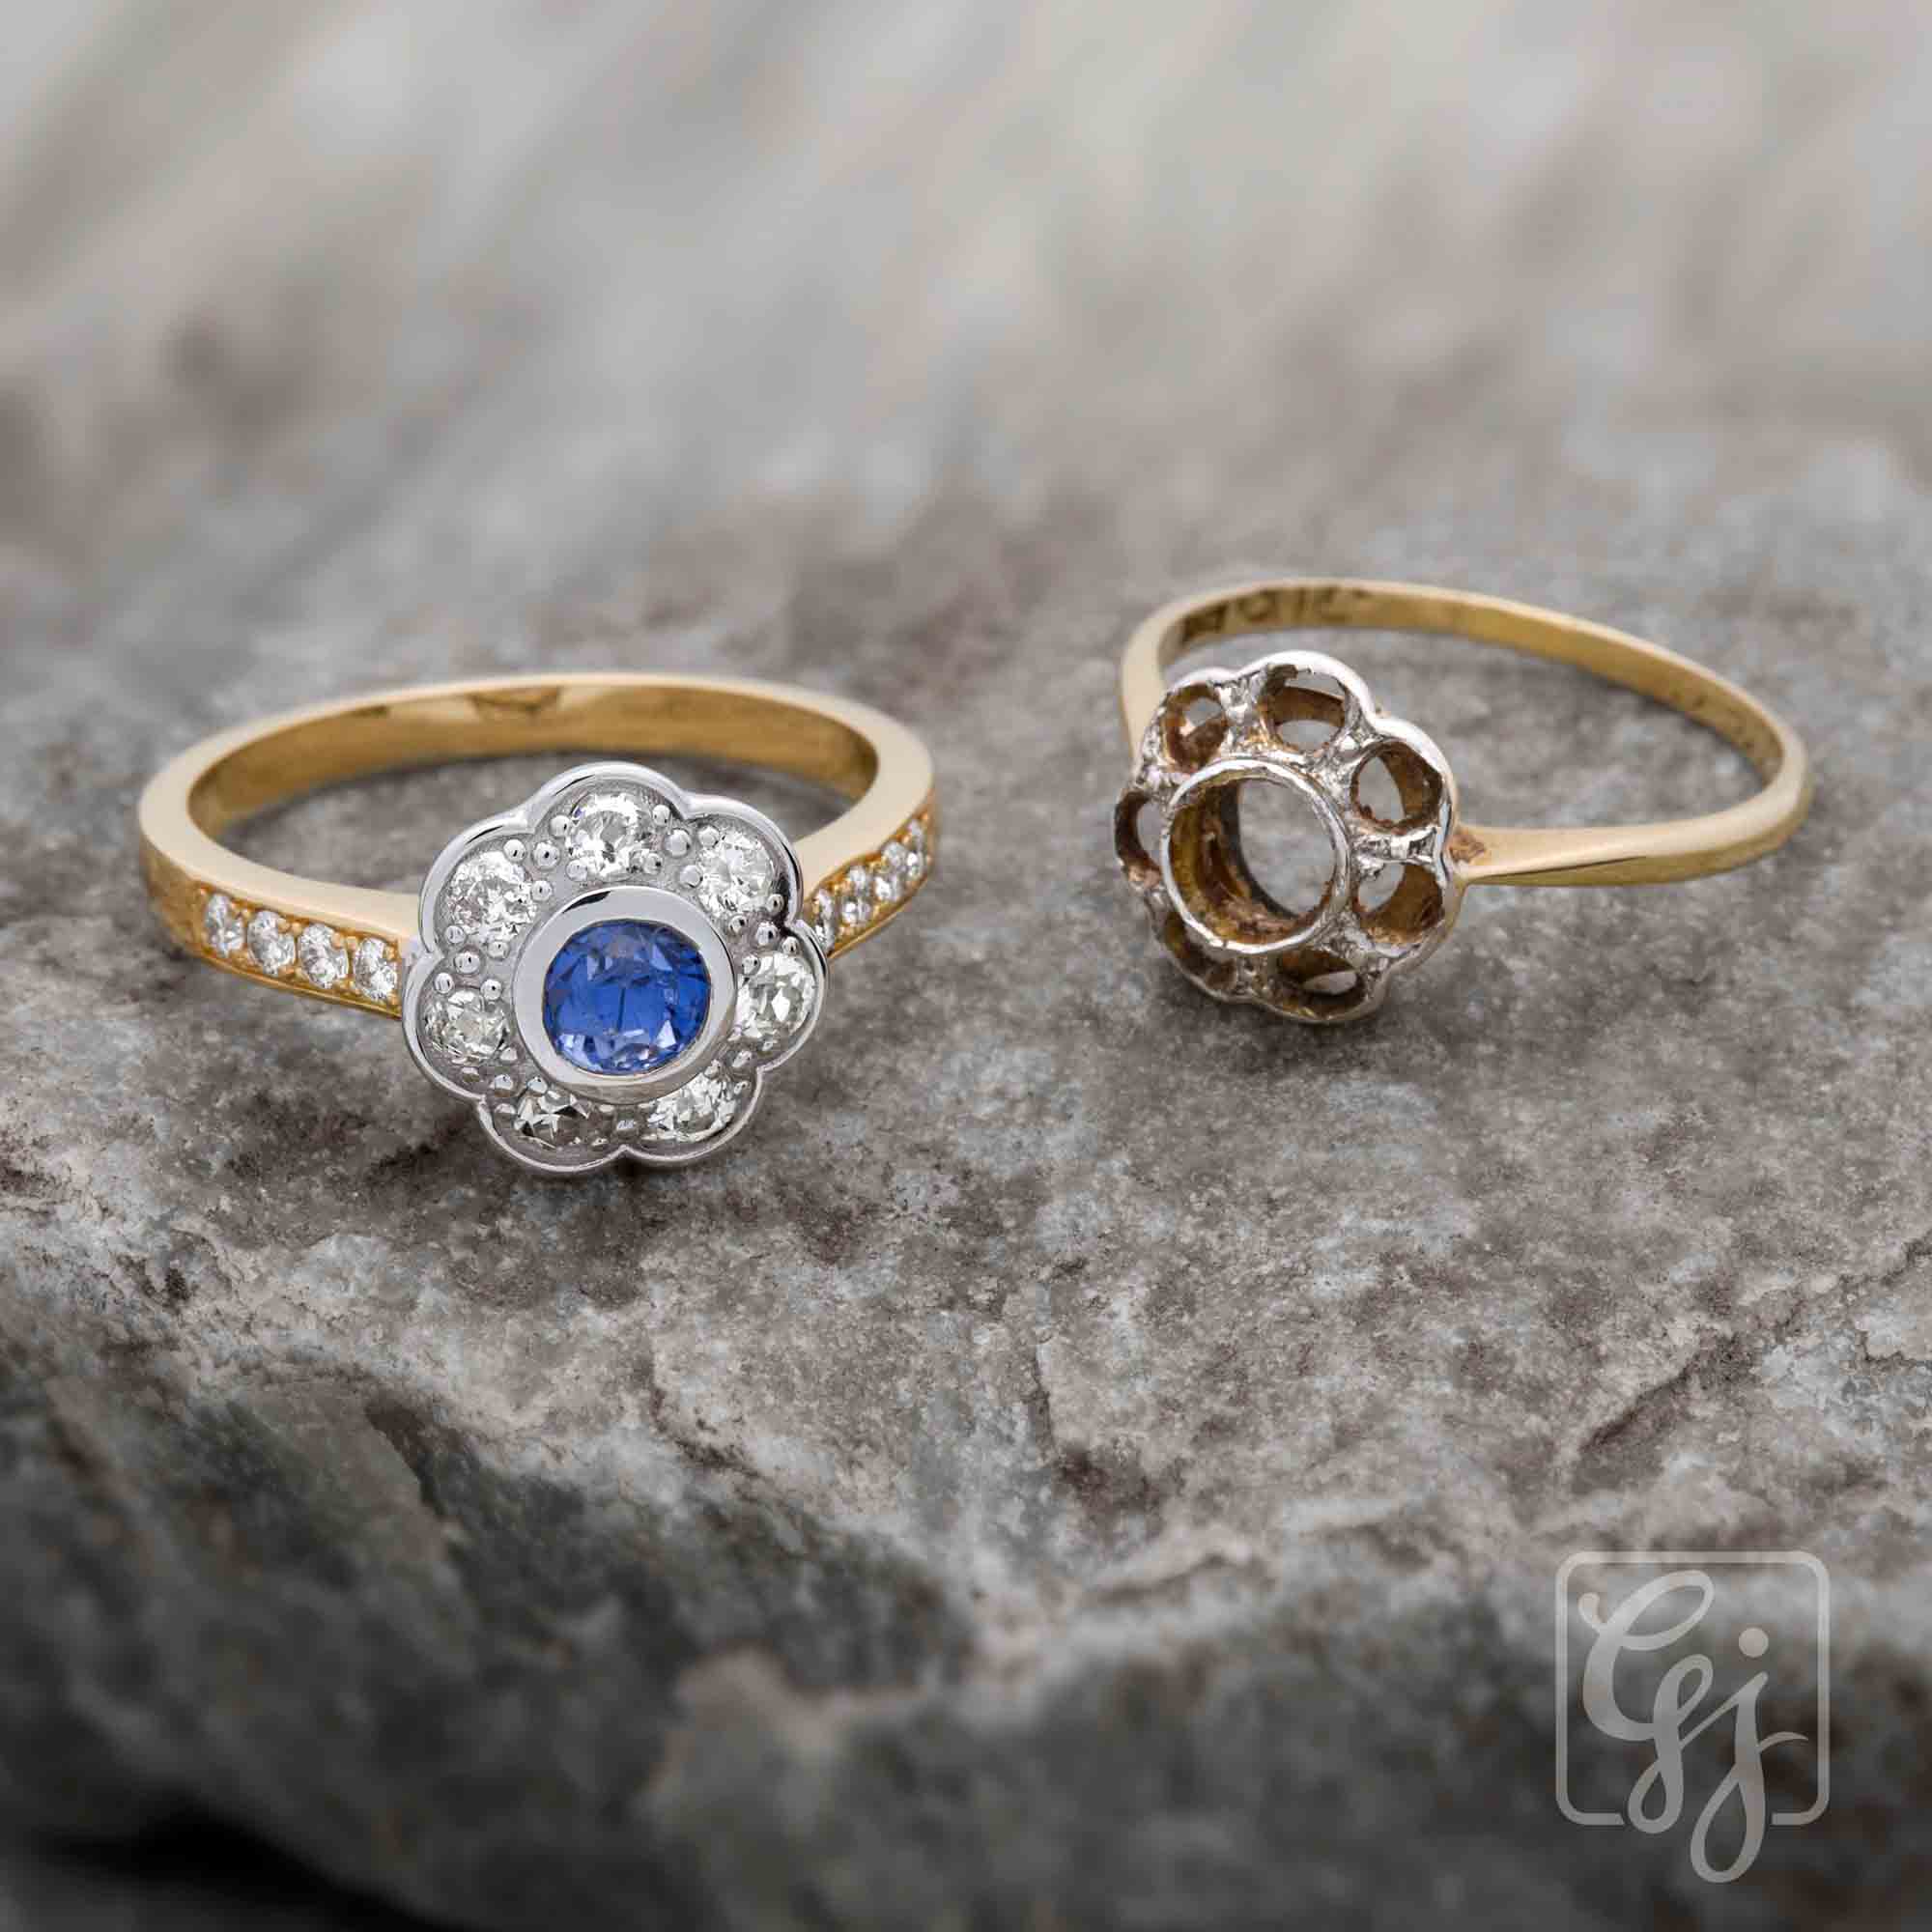 Before and After Ring Remodelled, 70 Year Old heirloom blue sapphire ring remodelling, jewellery remodelling by Gillian's Jewellery, Jewellery Shop Forest Hill Melbourne, Jewellery Repair, Jewellery Remodel, Jewellery Restore, Custom handmade jewellery Design